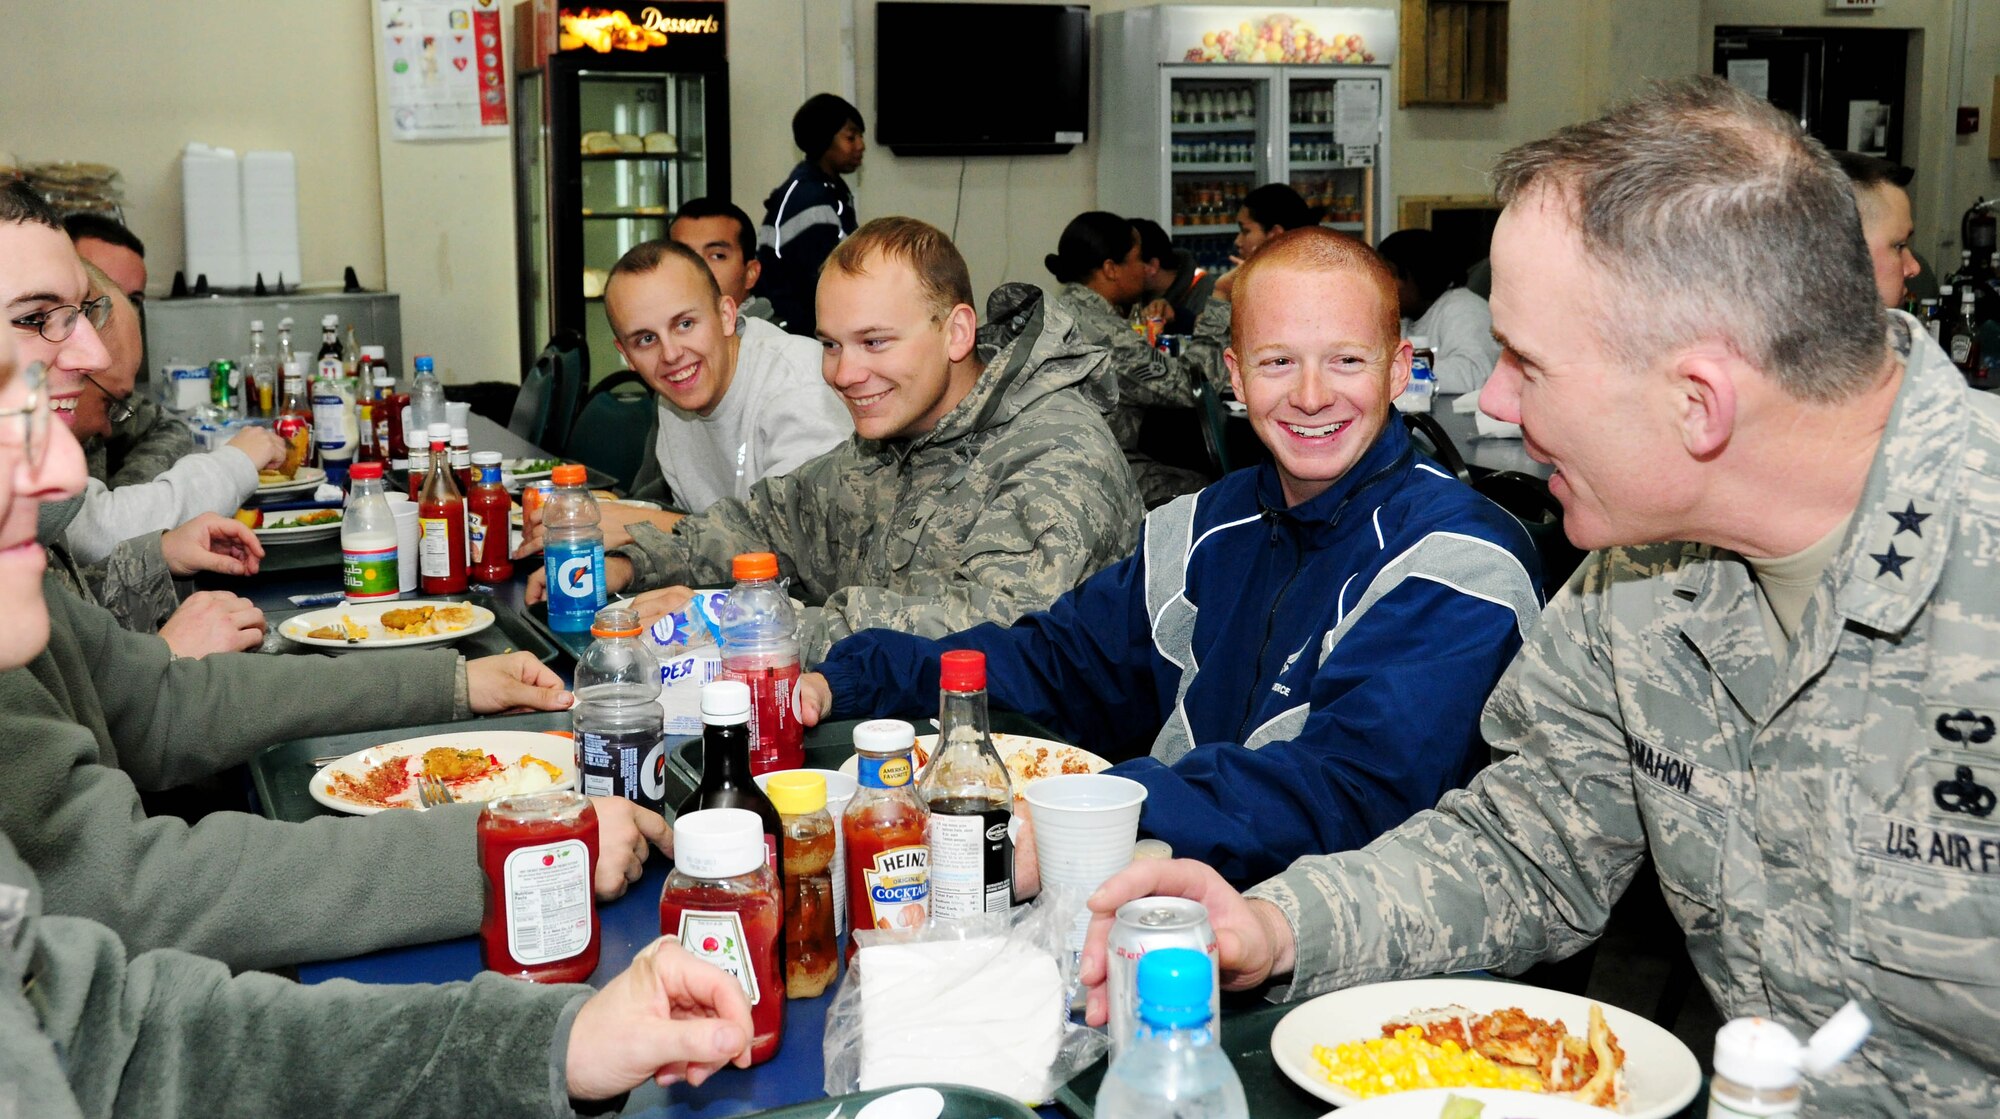 TRANSIT CENTER AT MANAS, Kyrgyzstan - Maj. Gen. Robert H. McMahon, Director of Logistics, Deputy Chief of Staff for Logistics, Installations and Mission Support, Headquarters U.S. Air Force, Washington, D.C., speaks with Airmen over dinner here Jan. 16. The maintenance Airmen are transiting home from Kandahar, Afghanistan and are from the 355th Aircraft Maintenance Squadron, Davis-Monthan Air Force Base, Ariz. (U.S. Air Force photo by Senior Airman Nichelle Anderson)